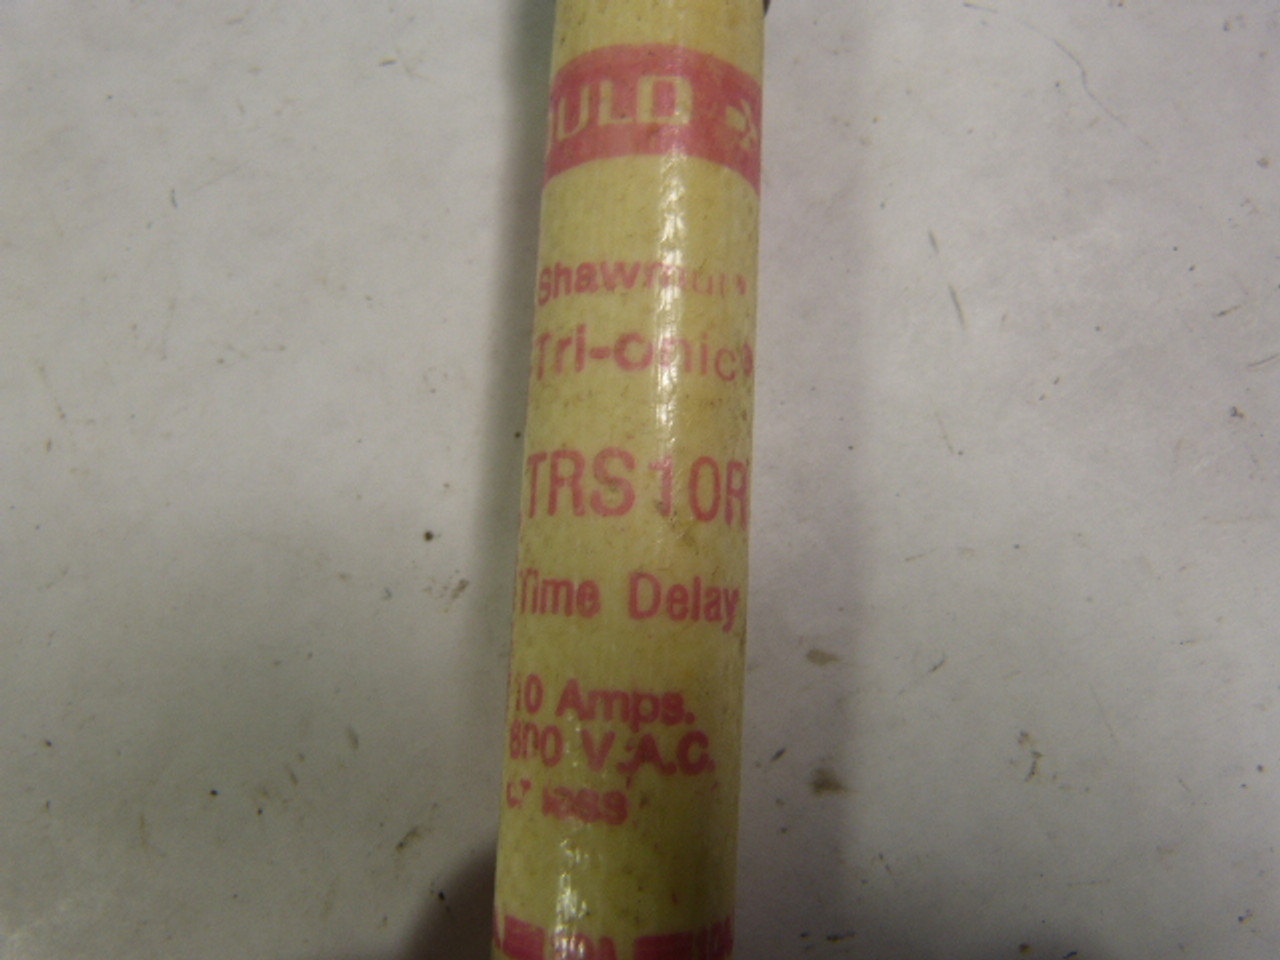 Gould Shawmut TRS10R Time Delay Fuse 10A 600V USED